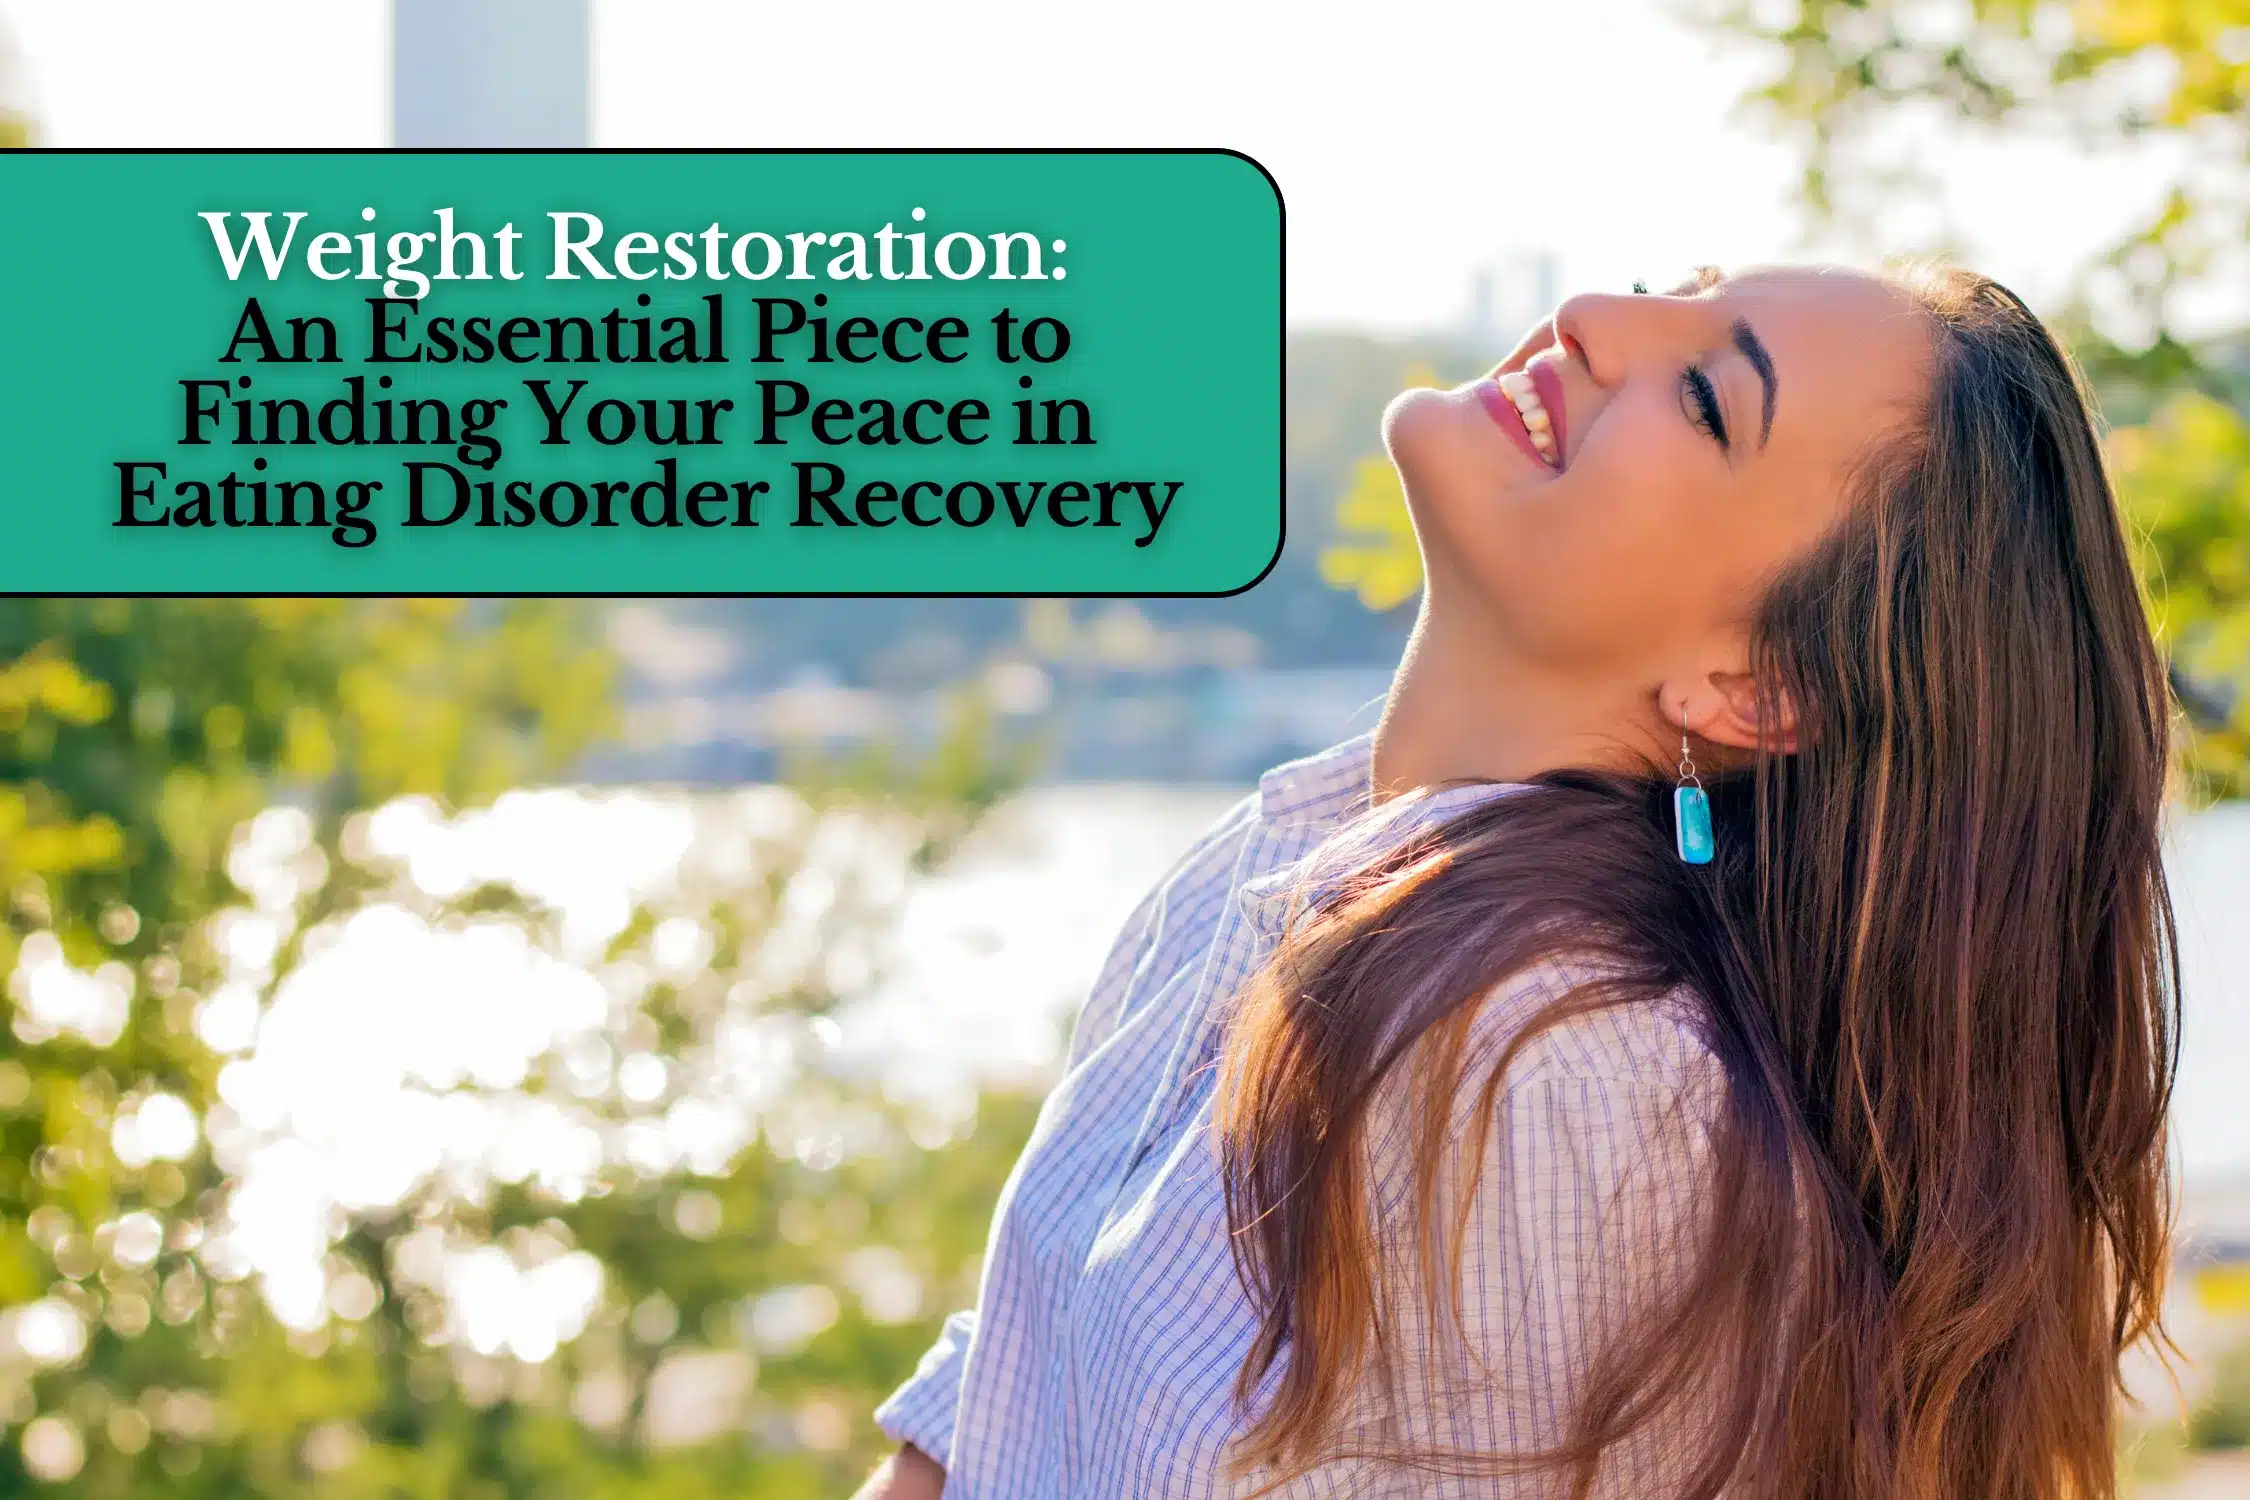 Weight Restoration: An Essential Piece to Finding Your Peace in Eating Disorder Recovery